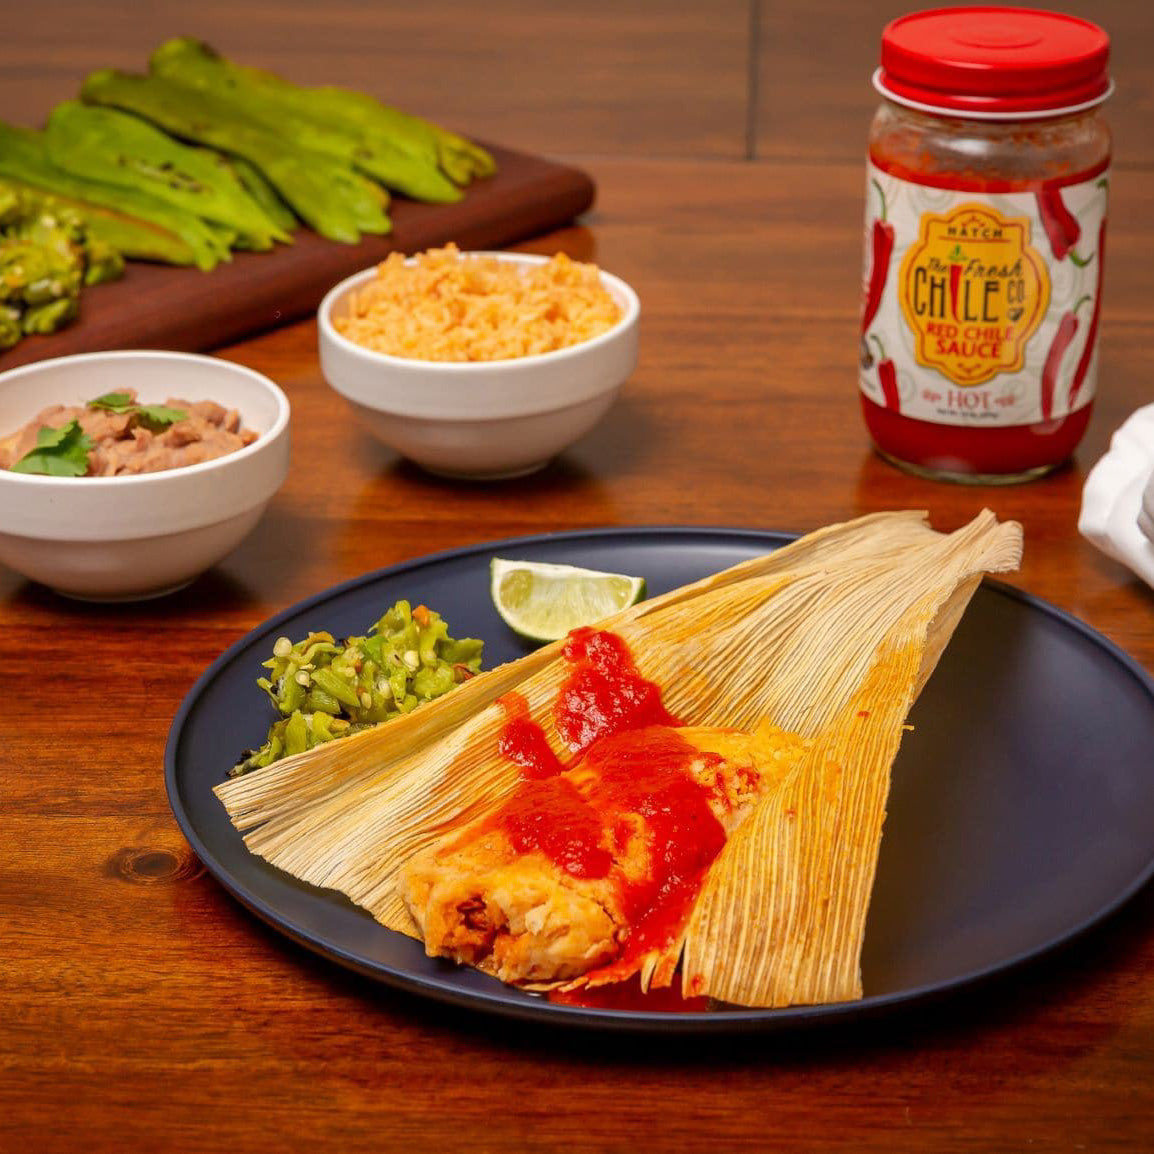 A plate with Hatch Red Chile Pork Tamales topped with Hatch Red Chile sauce, accompanied by lime wedges, served with sides of rice, beans, and nopales in the background, next to a jar